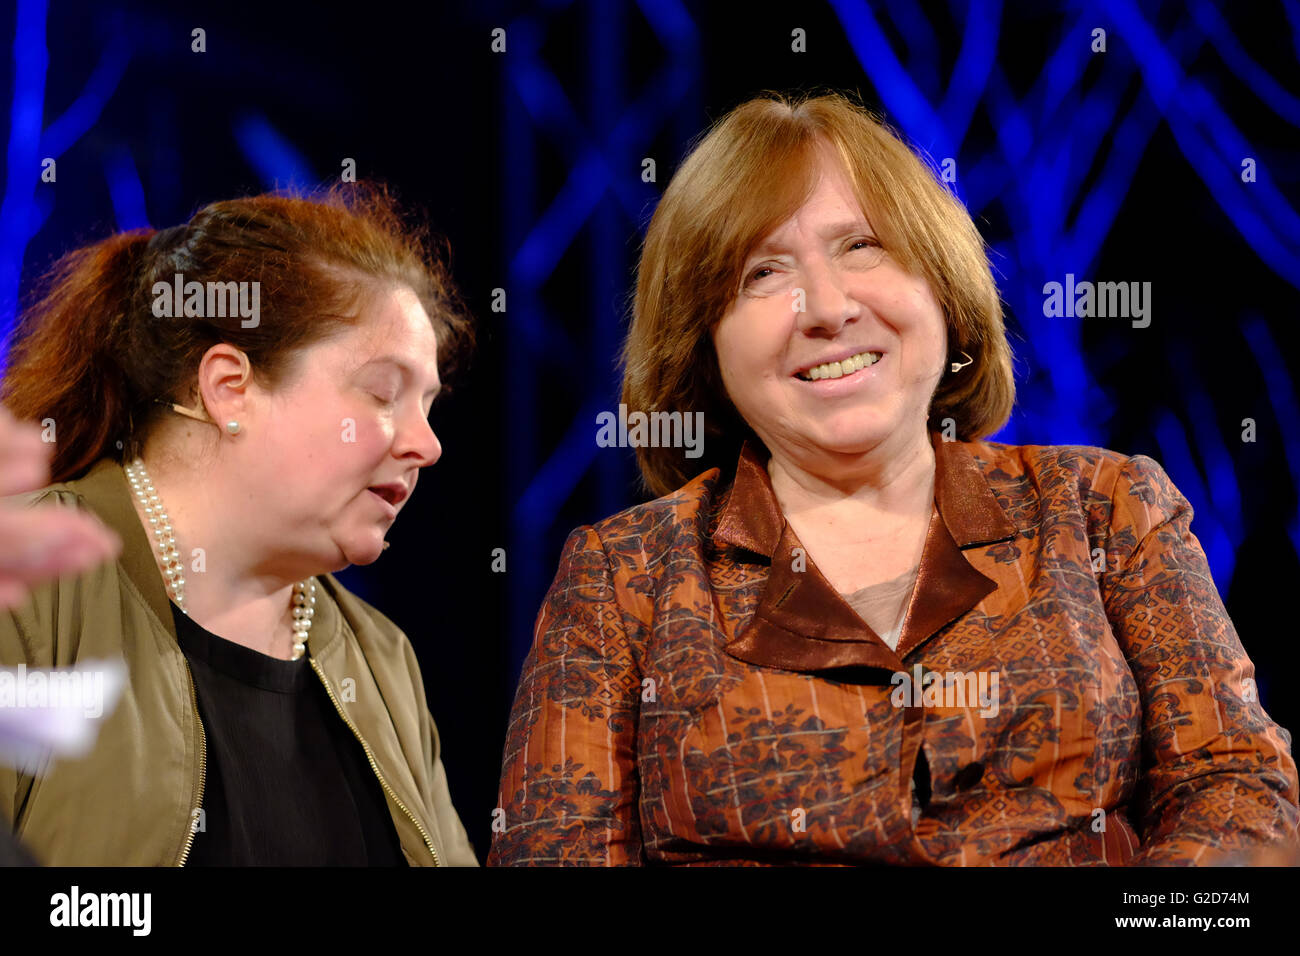 Hay Festival - Saturday 28th May 2016 - Journalist, author and Nobel Literature Laureate Svetlana Alexievich on stage with her translator talking about her most recent work Second Hand Time. Stock Photo